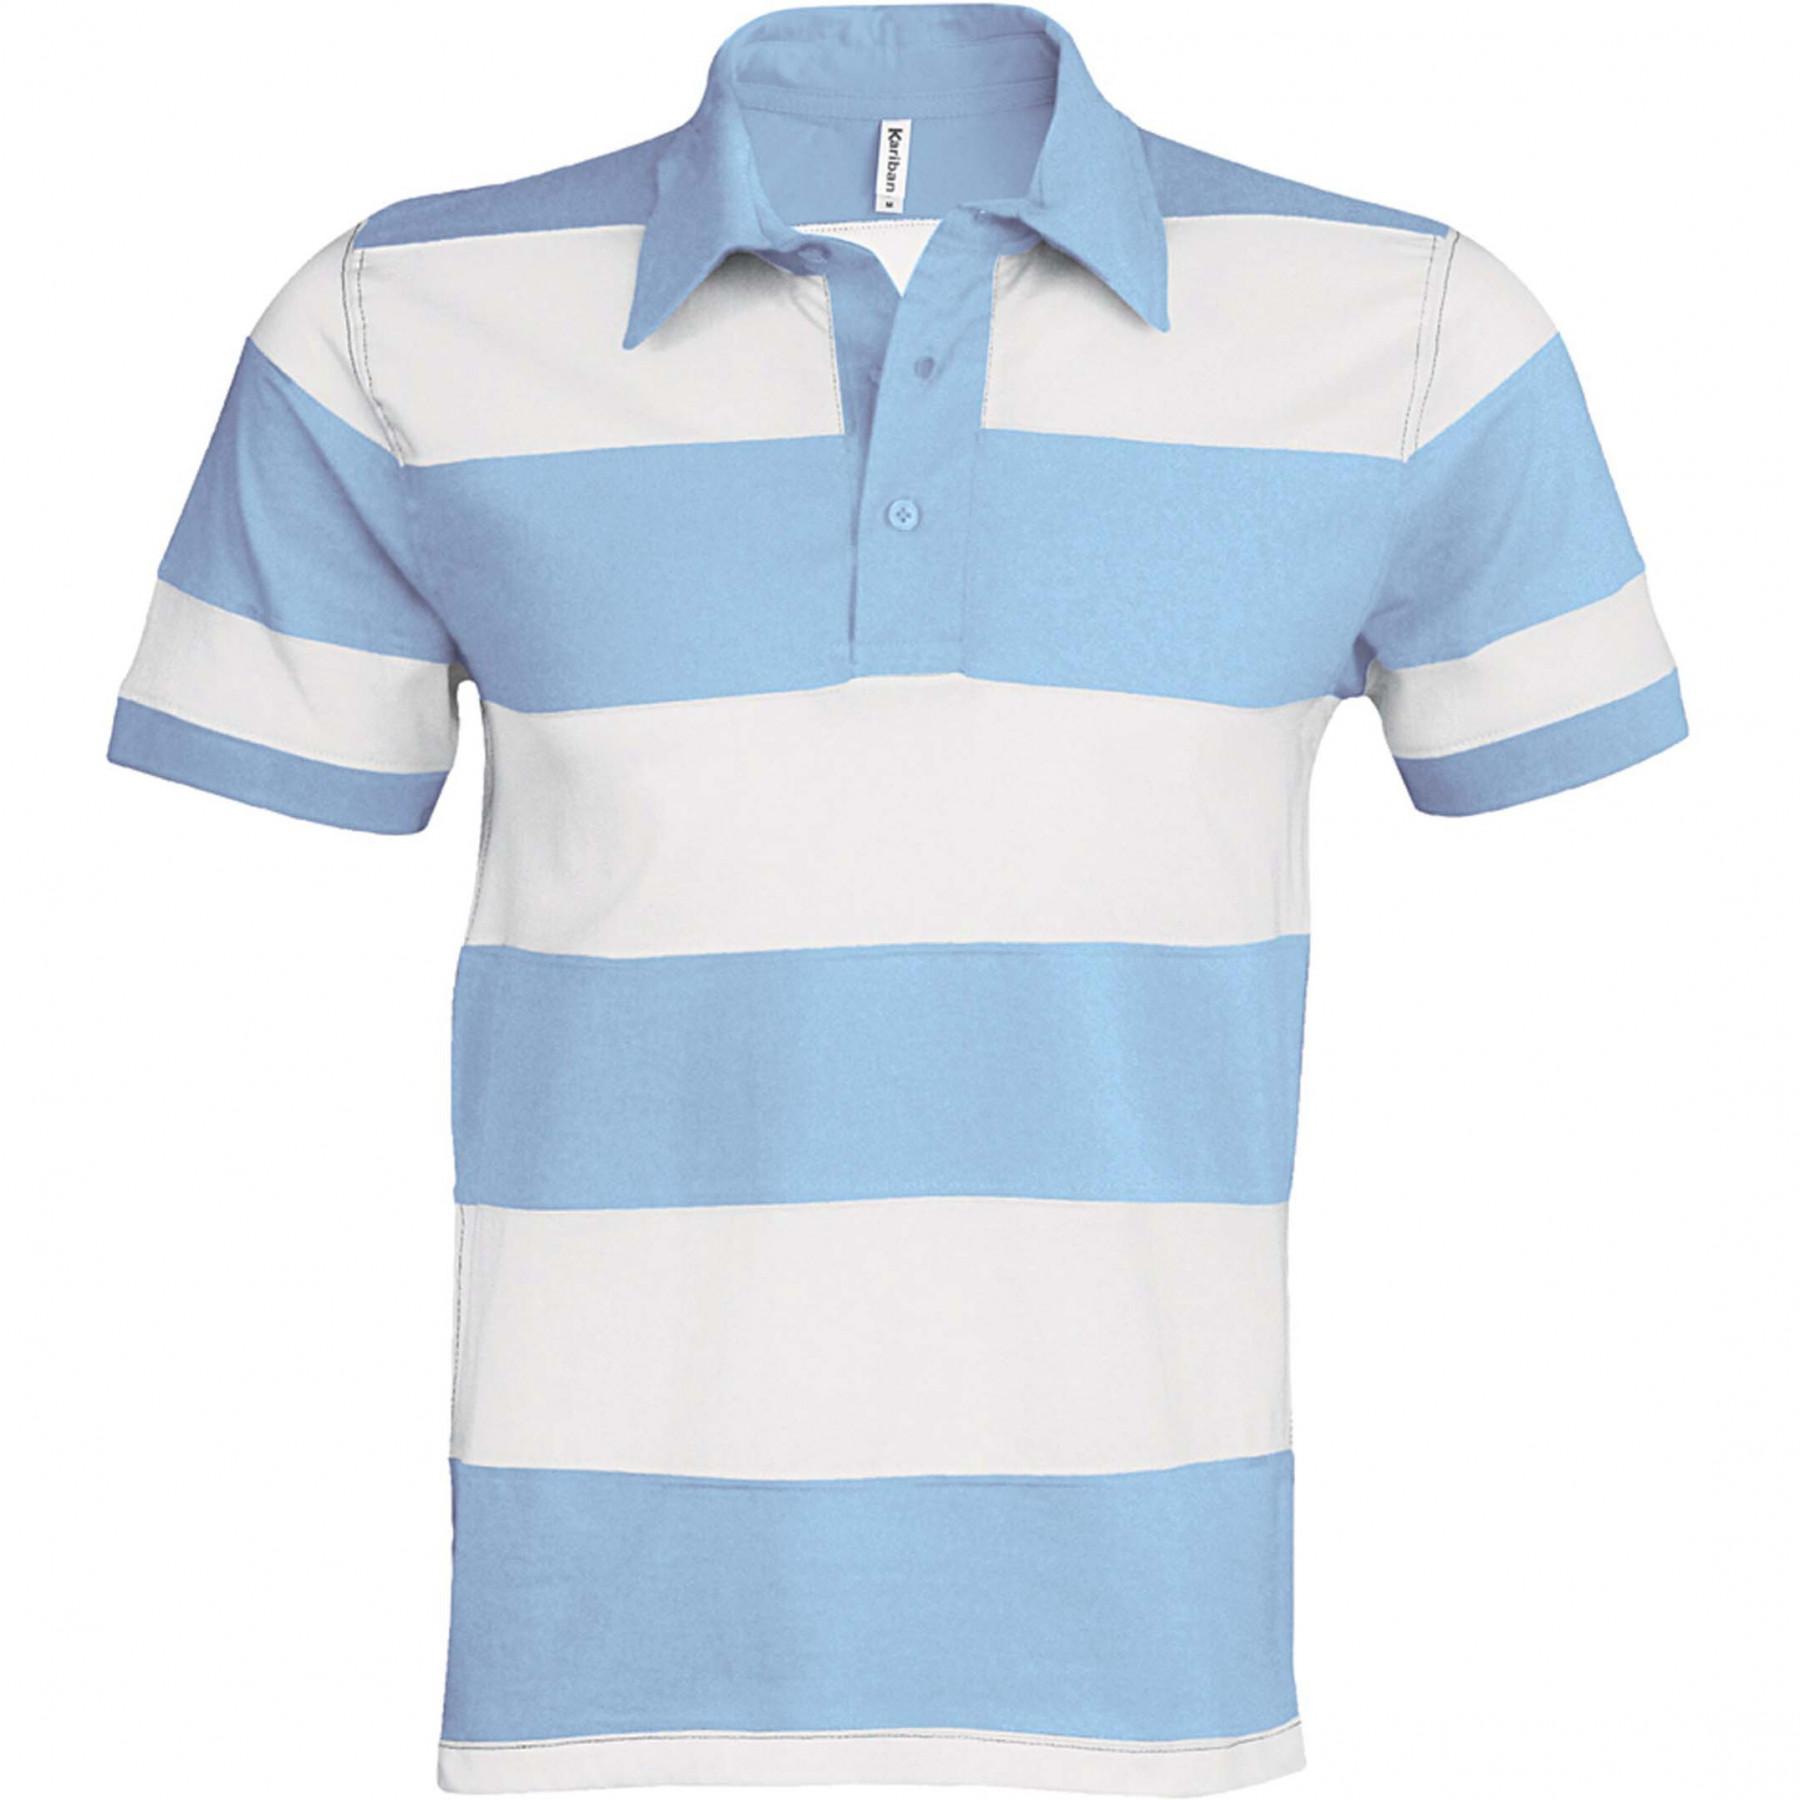 Ray > Rugby Striped Polo Shirt Short Sleeve